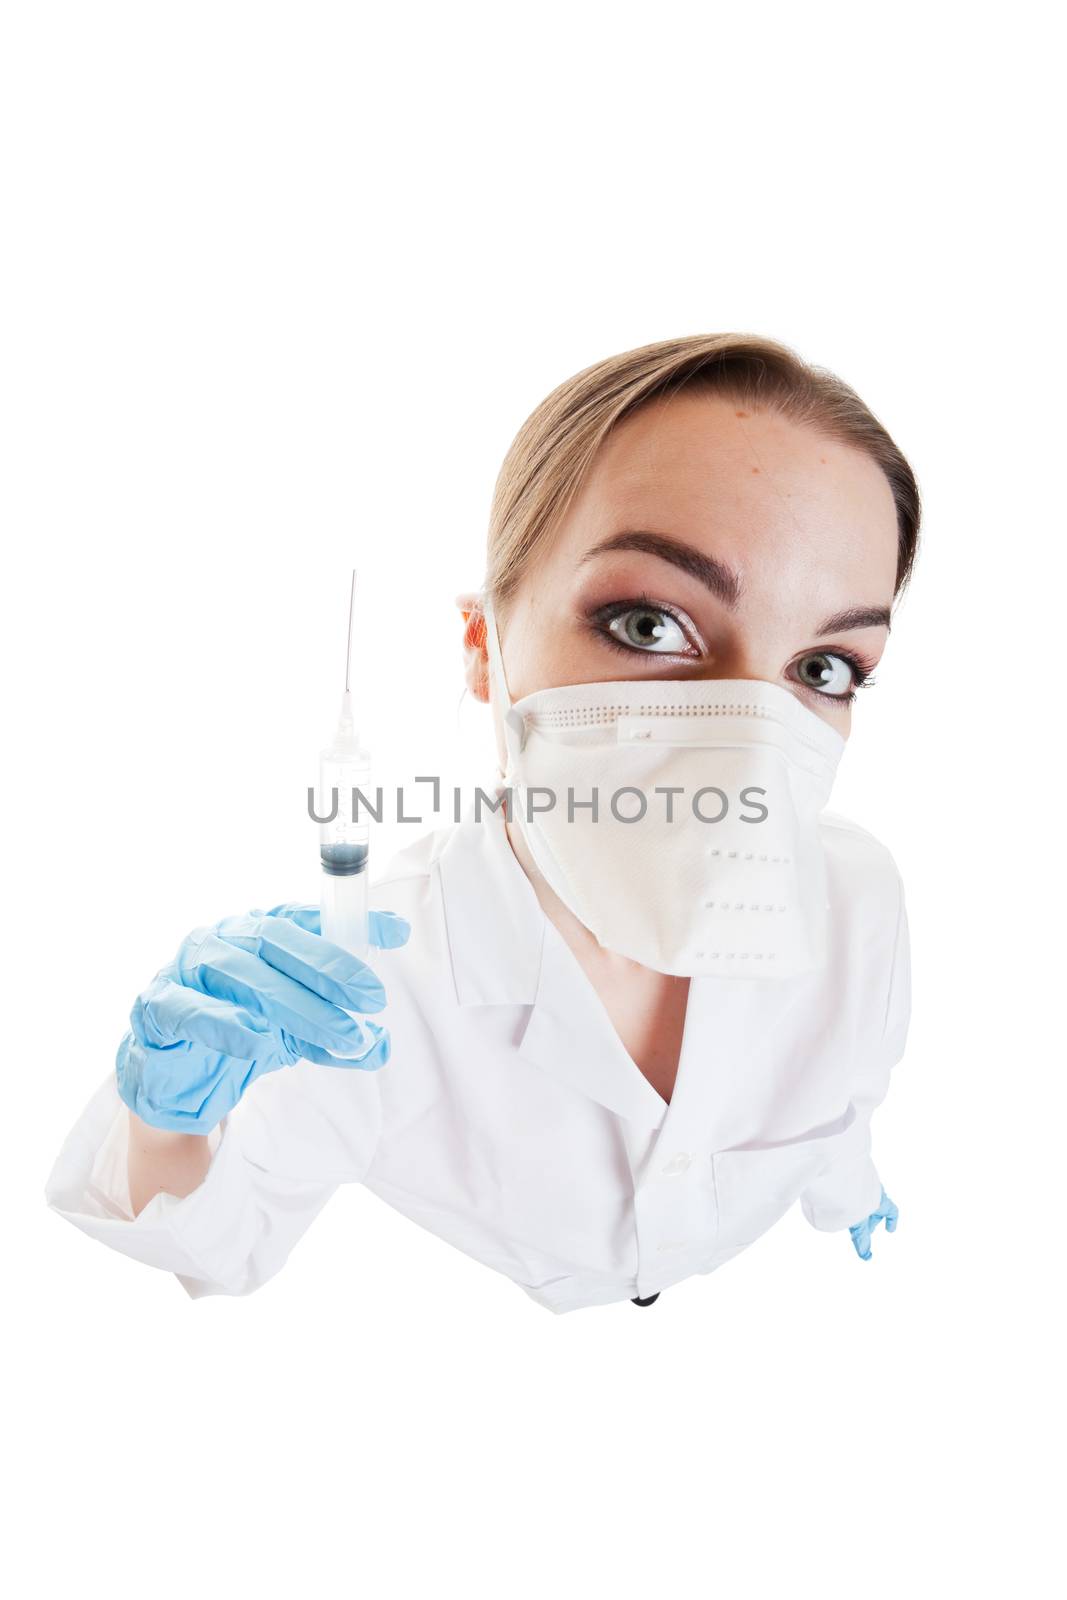 Wide angle overhead view of a nurse with a needle.  Shot on white background.